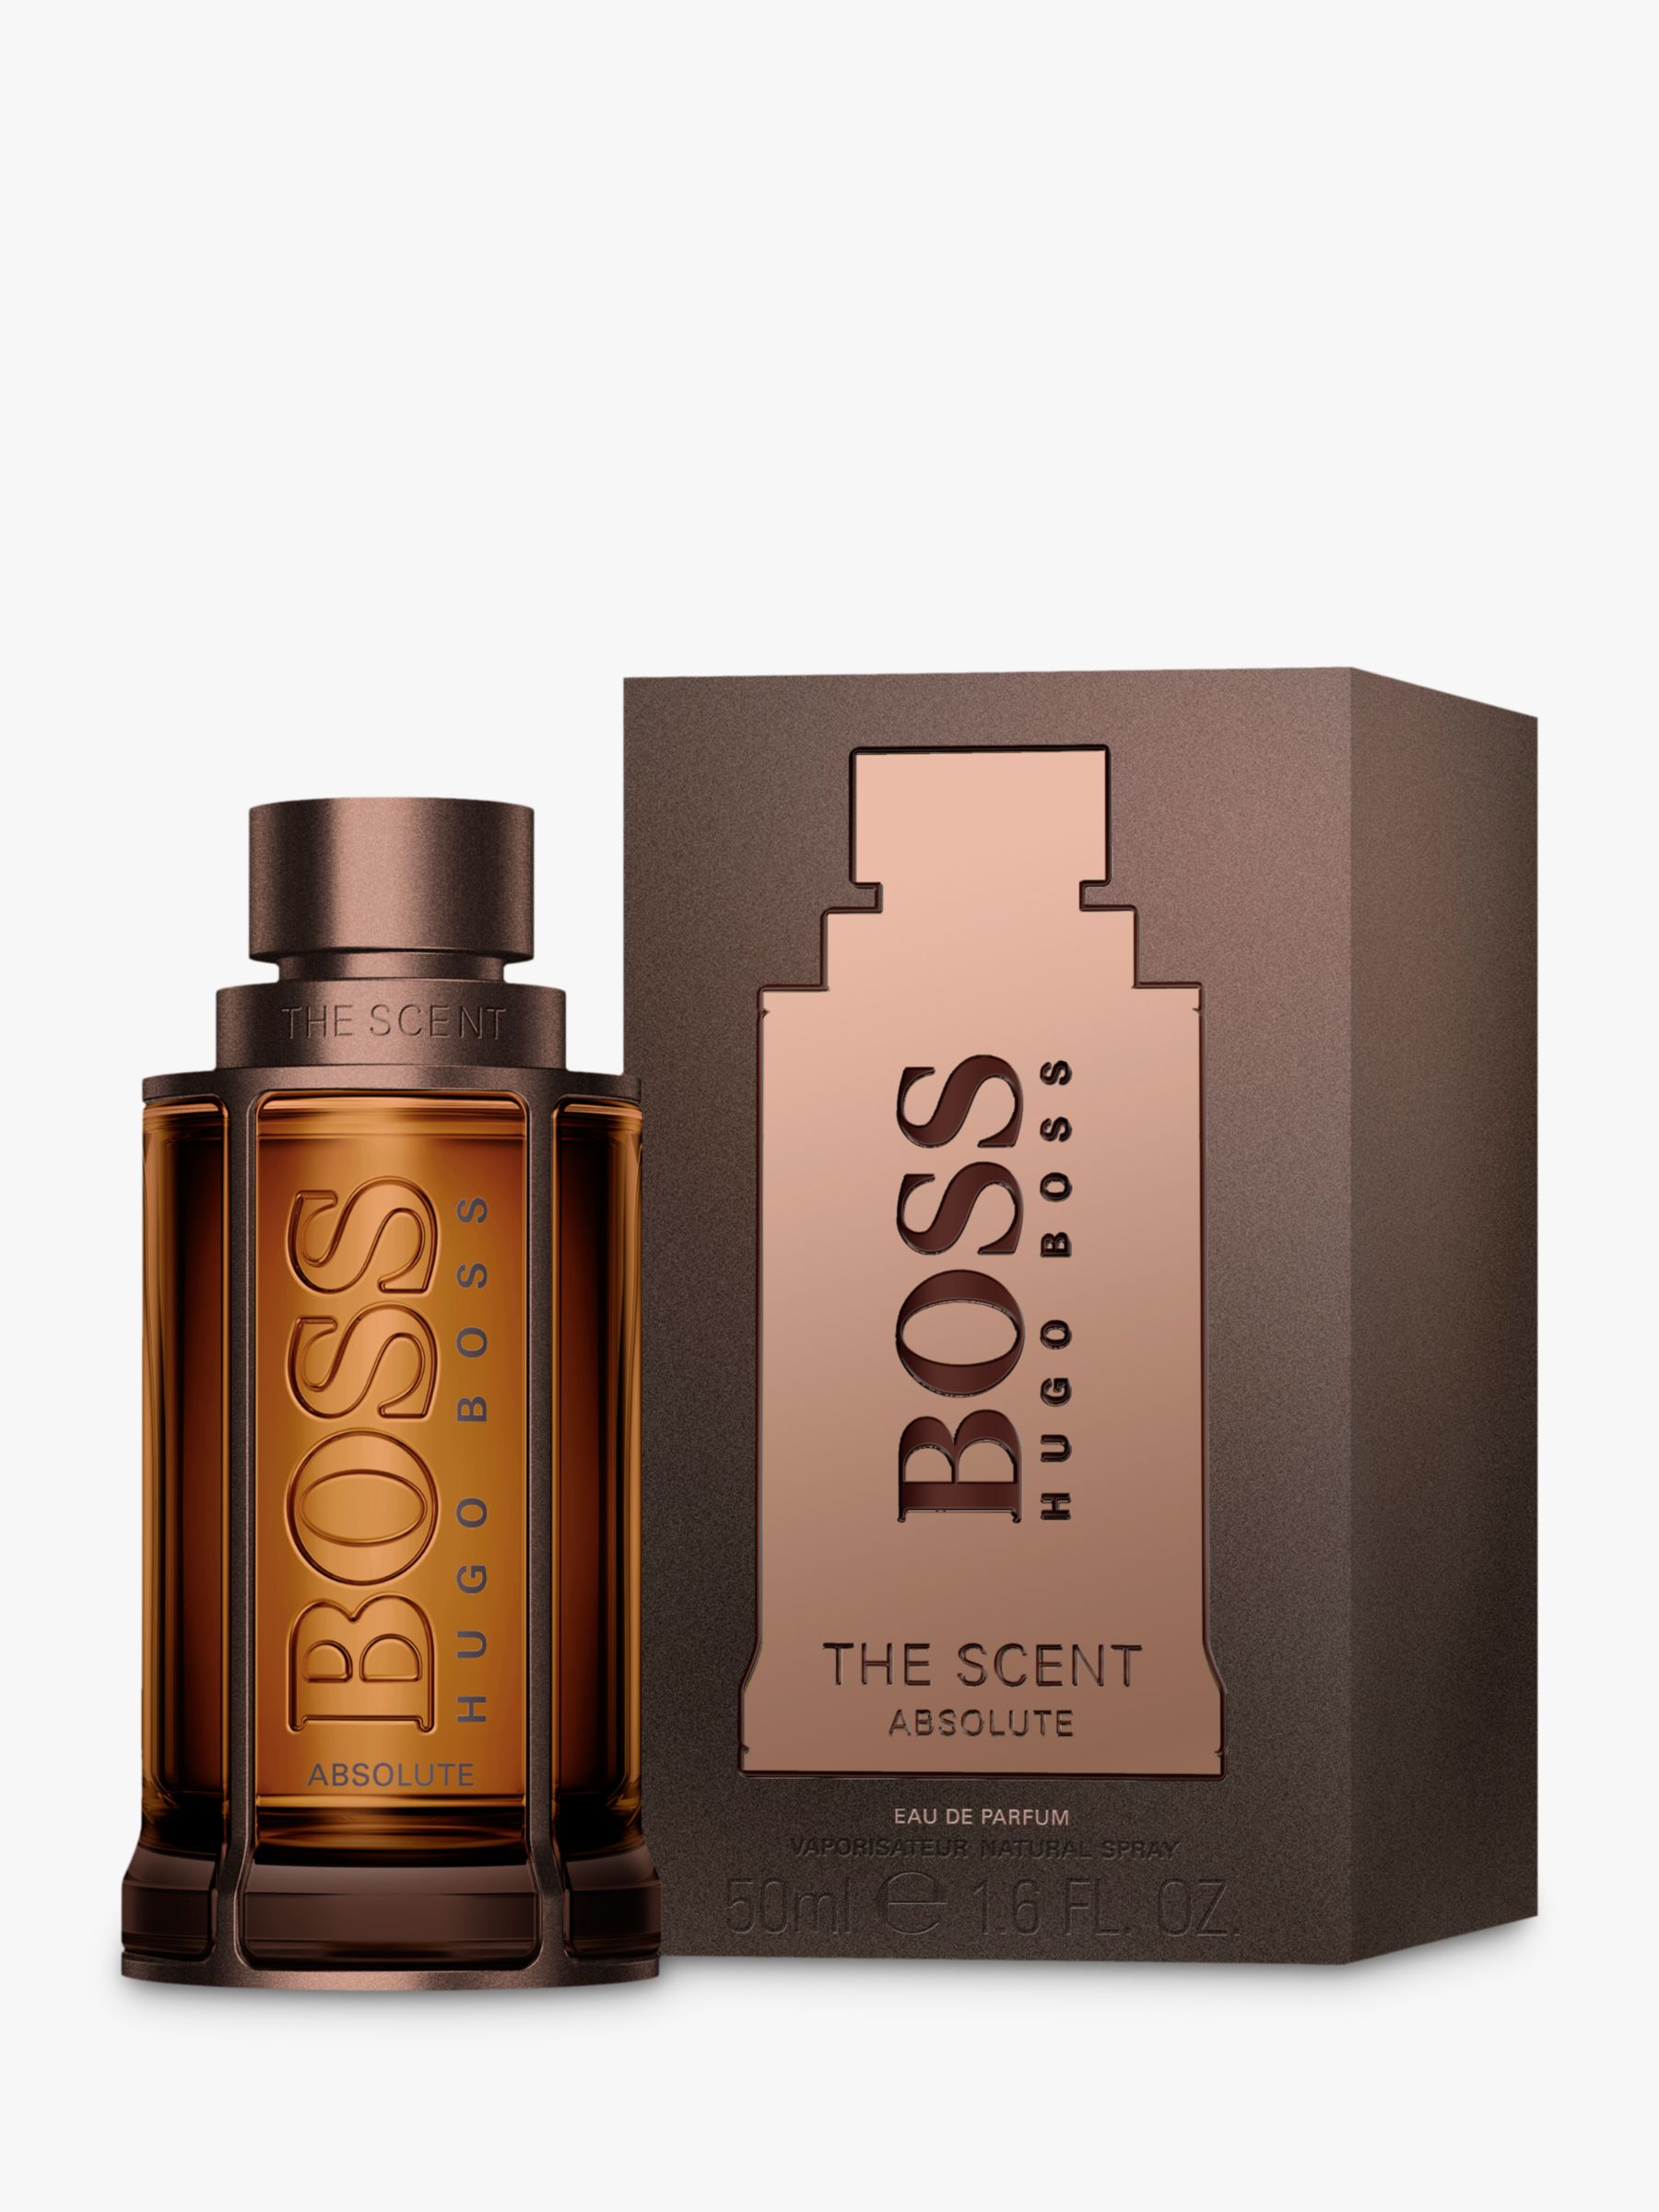 hugo boss perfume the scent for him